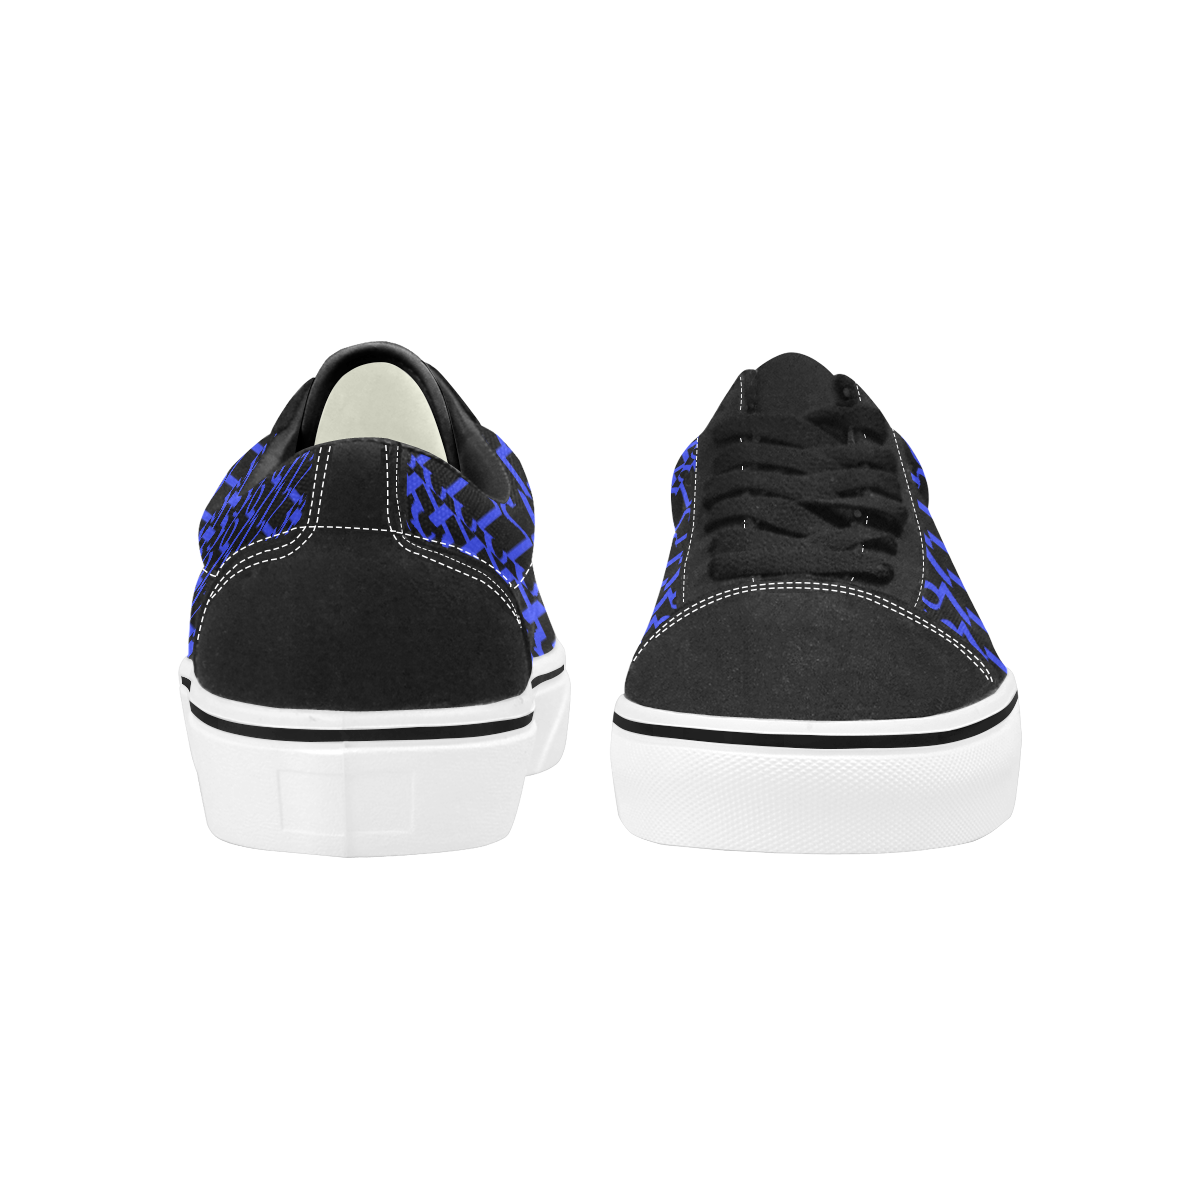 NUMBERS Collection 1234567 Blue/Black Men's Low Top Skateboarding Shoes (Model E001-2)